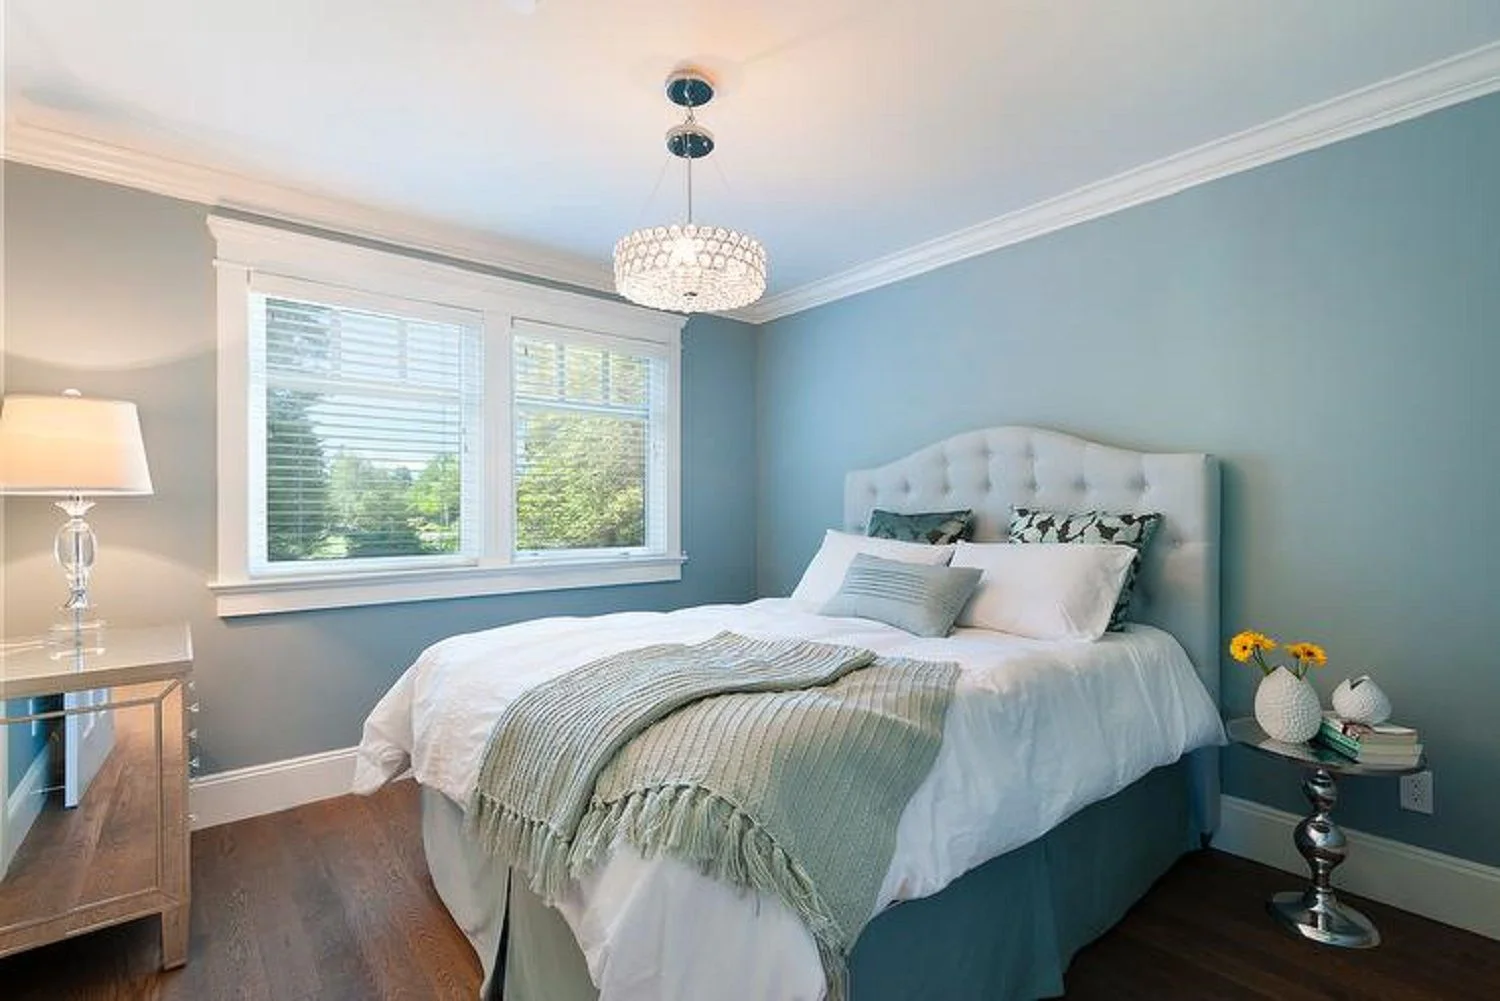 Decorate With Light Blue in a Bedroom